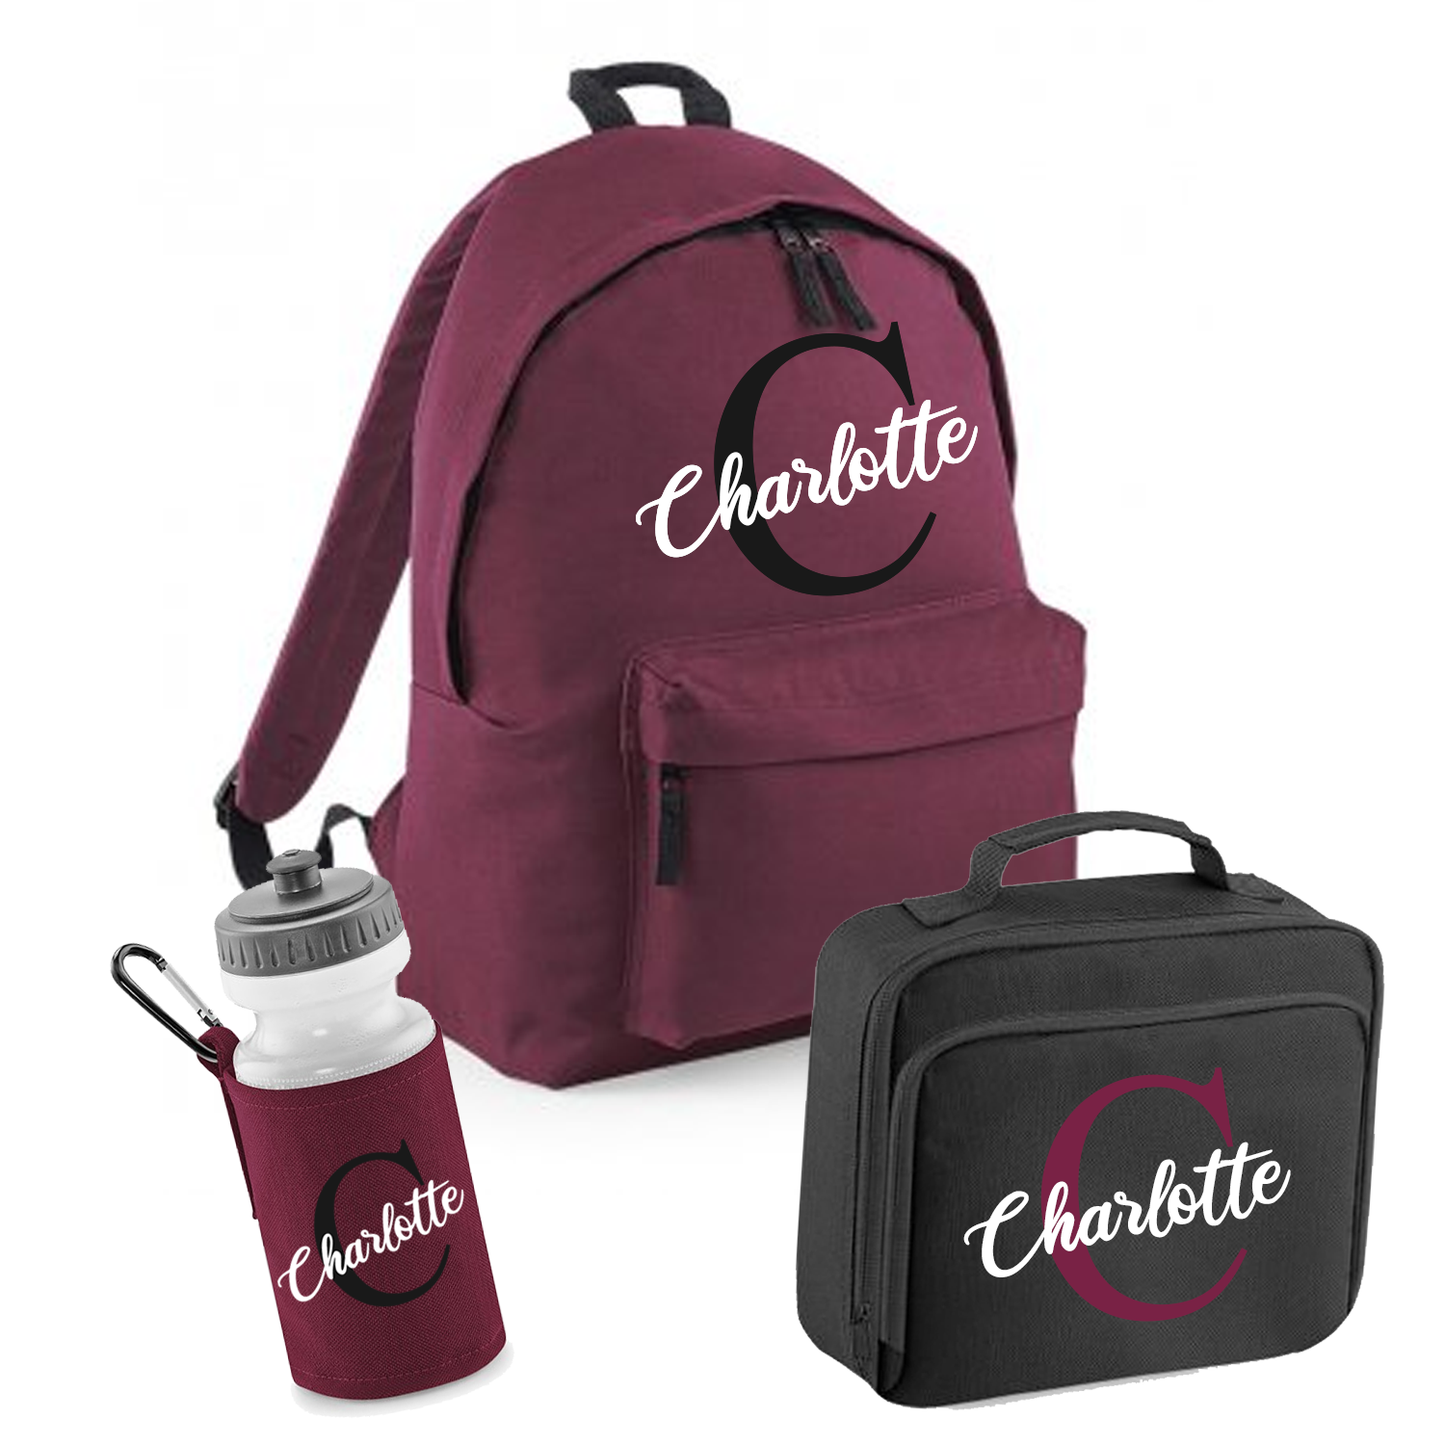 Back to School Personalised Maroon Set - other options available